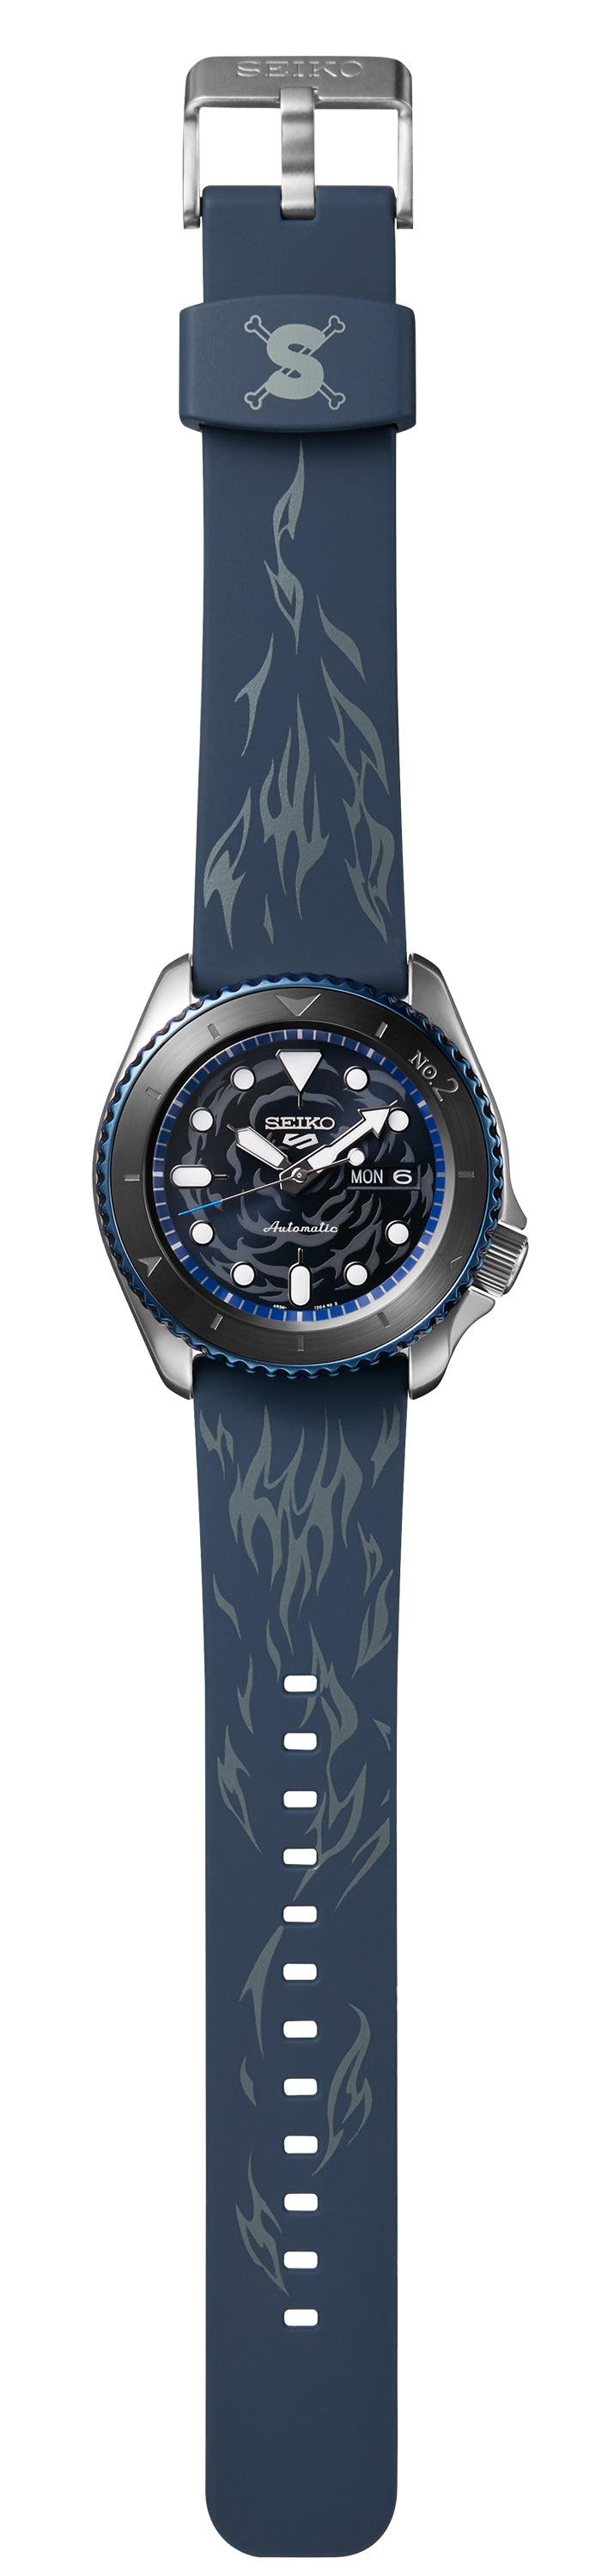 SEIKO 5 SPORTS SRPH71K1 LIMITED EDITION ONE PIECE - SABO